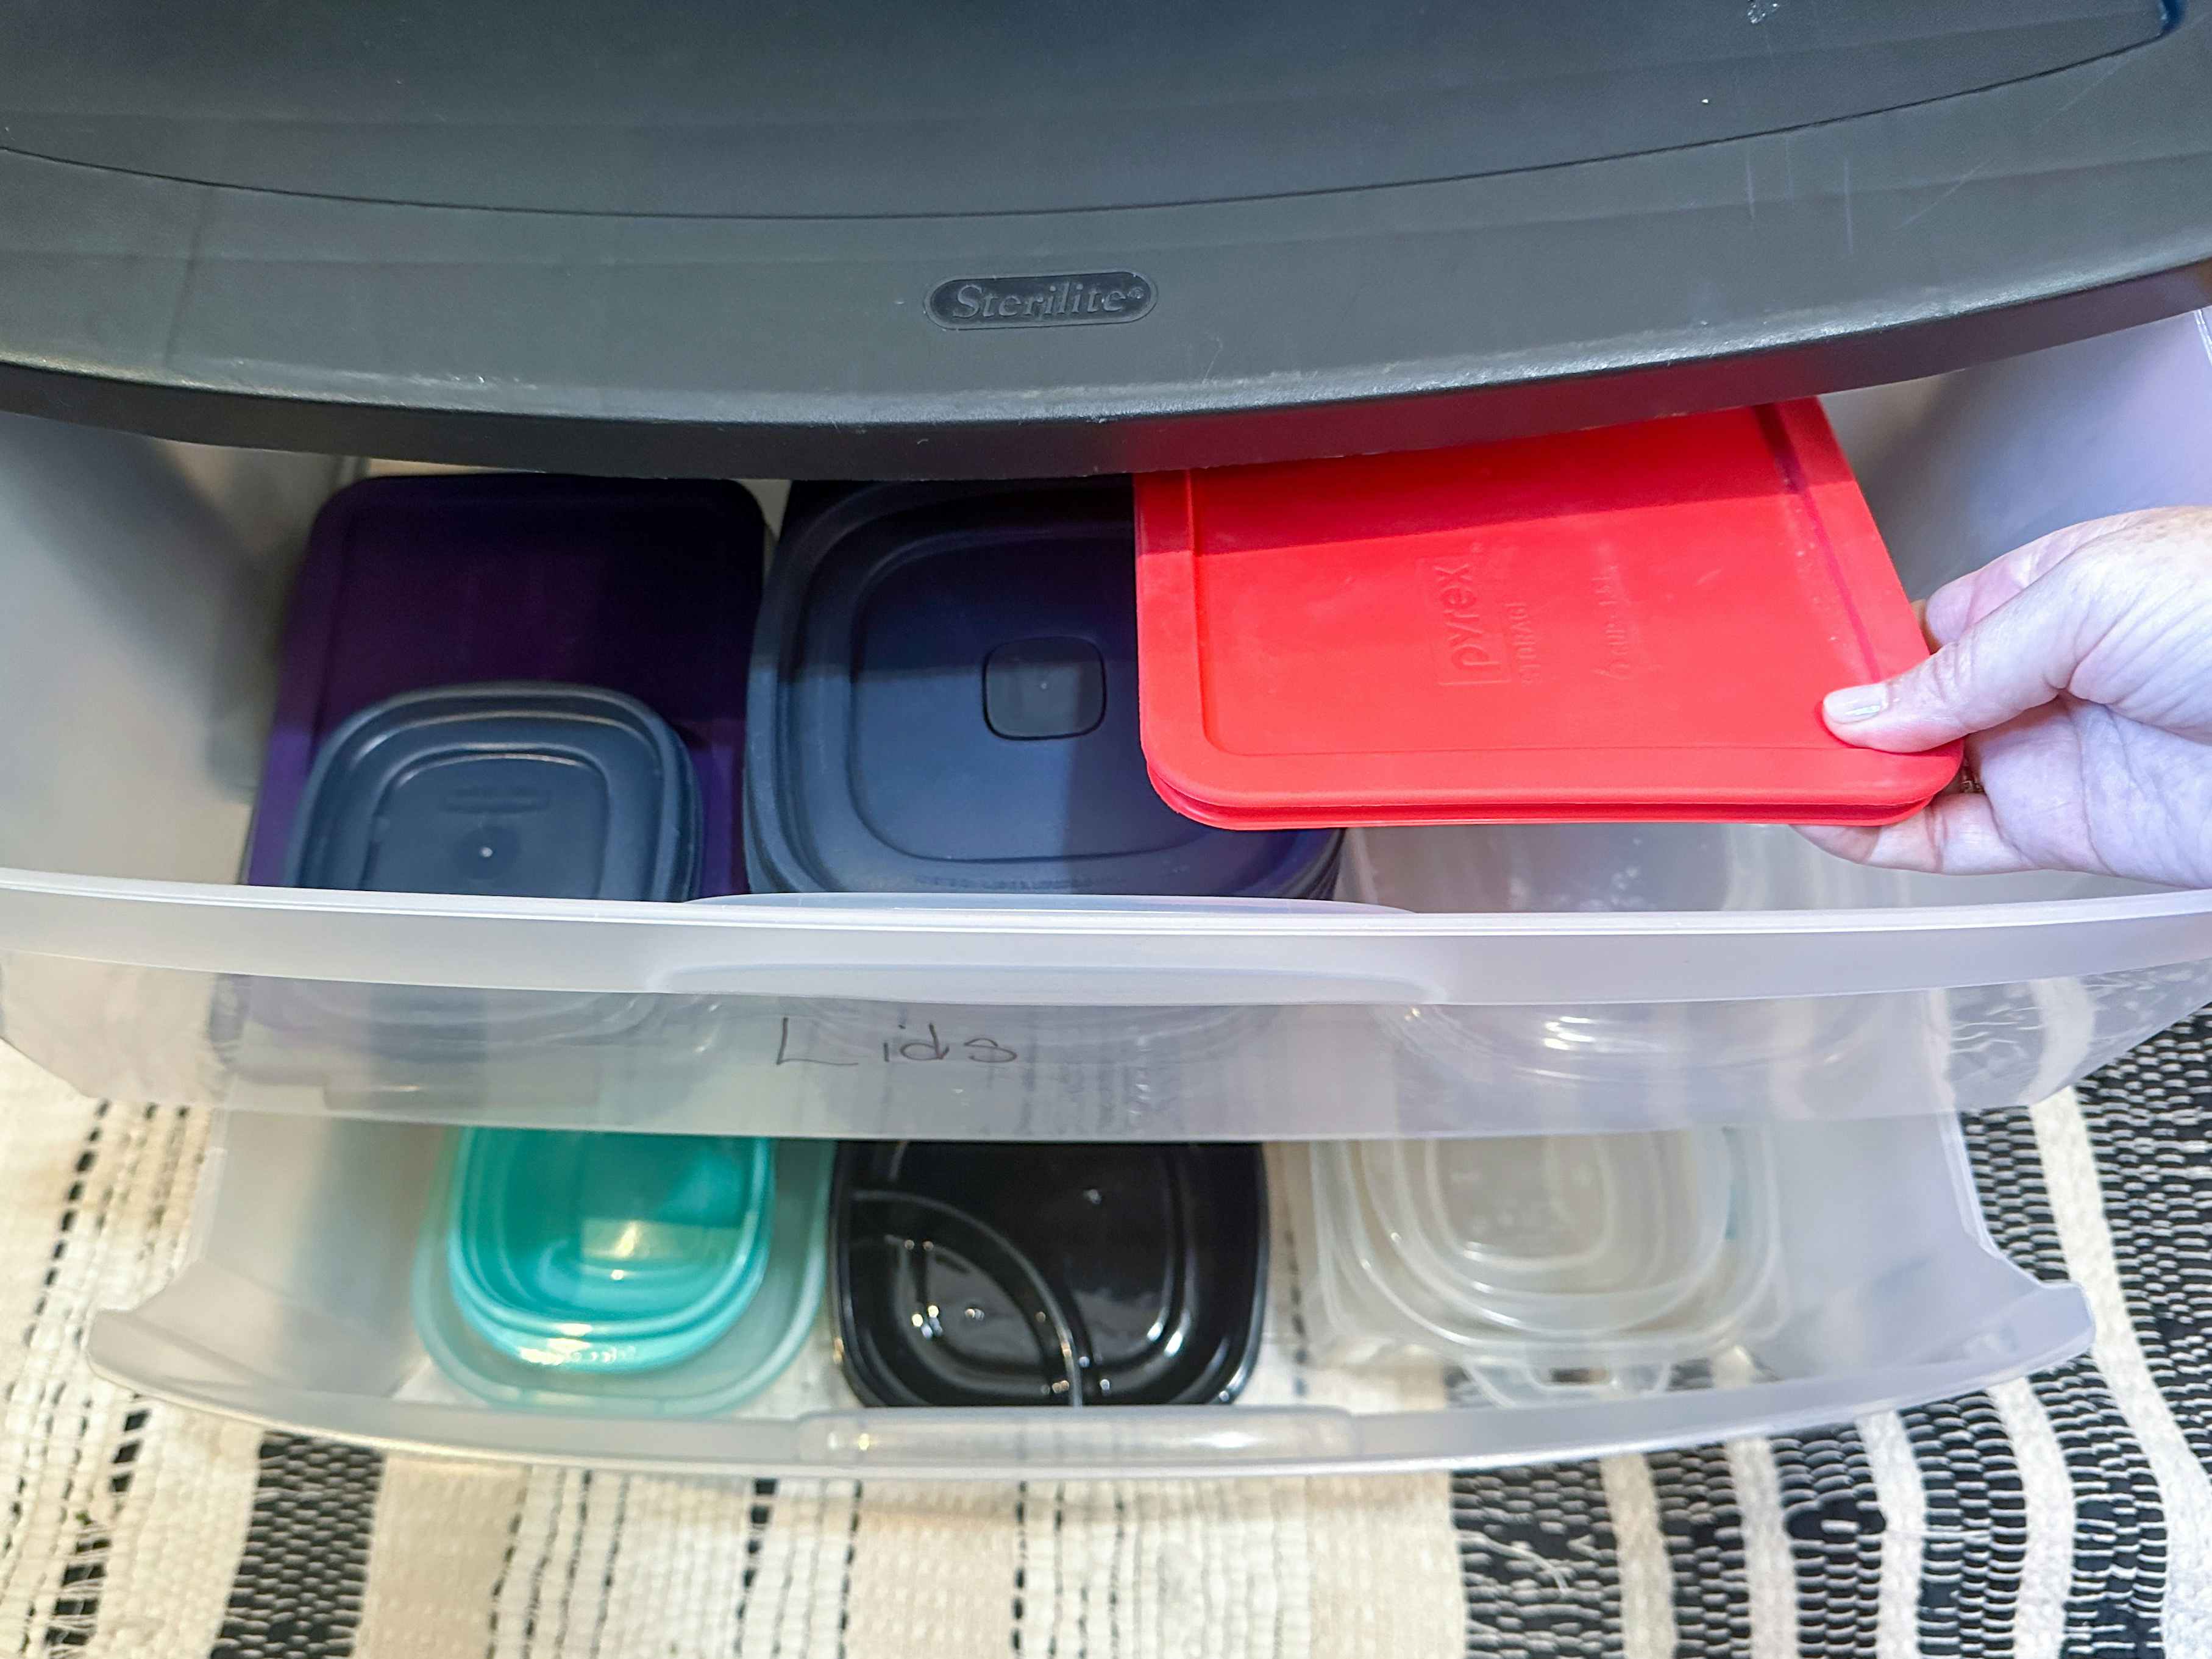 7 Amazing Tips For Organizing Your Tupperware And Food Storage Containers –  DIY Home Sweet Home